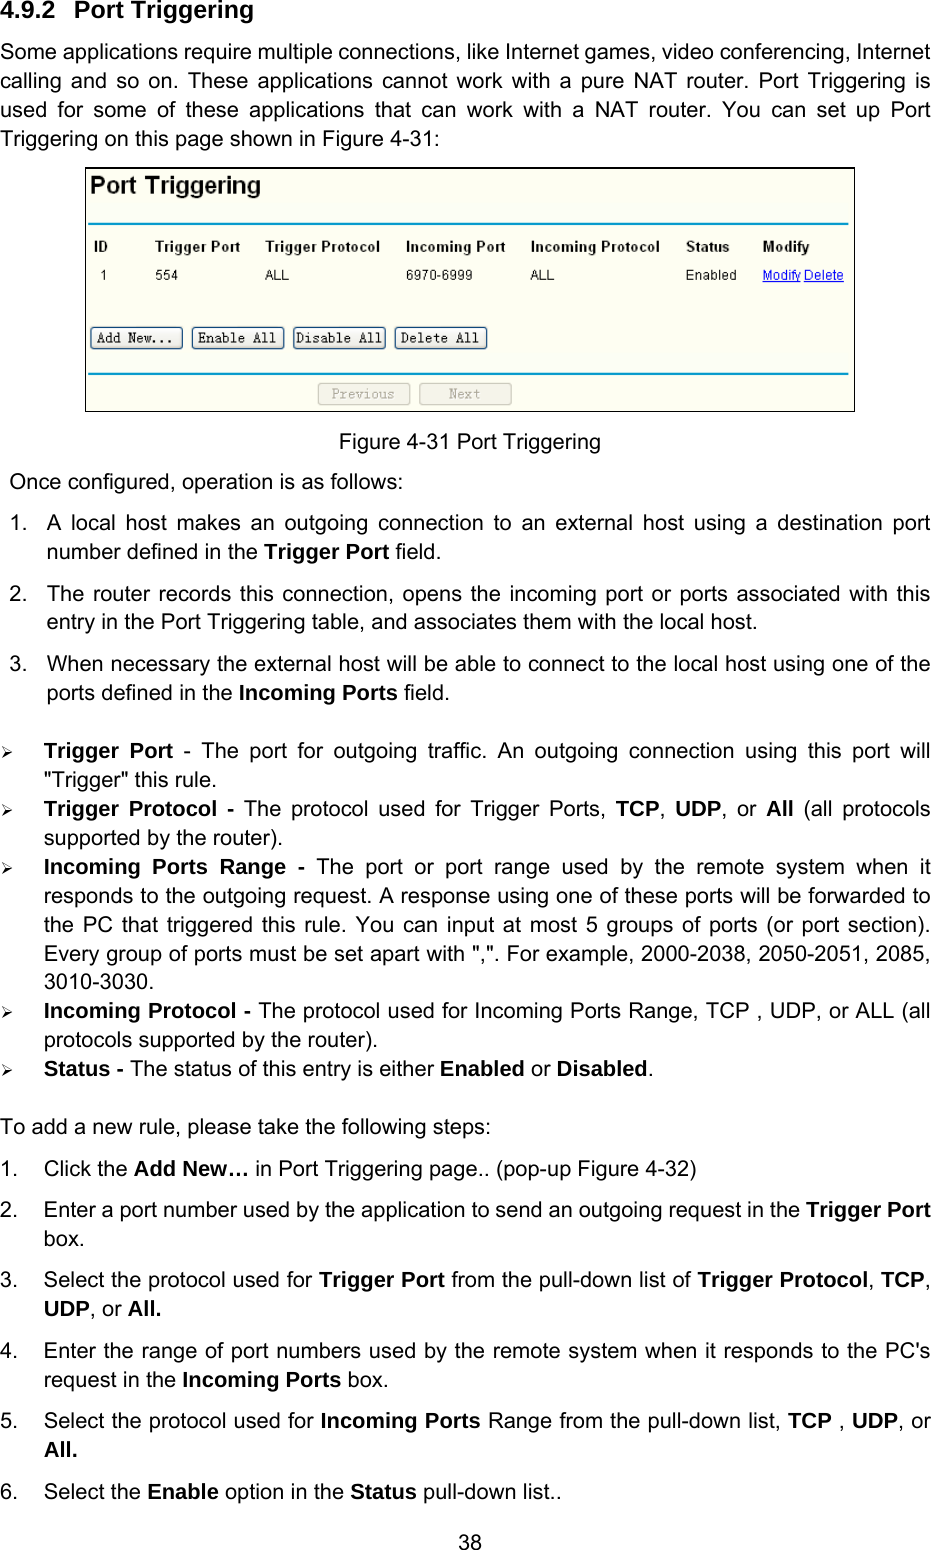  38 4.9.2  Port Triggering Some applications require multiple connections, like Internet games, video conferencing, Internet calling and so on. These applications cannot work with a pure NAT router. Port Triggering is used for some of these applications that can work with a NAT router. You can set up Port Triggering on this page shown in Figure 4-31:  Figure 4-31 Port Triggering Once configured, operation is as follows:   1.  A local host makes an outgoing connection to an external host using a destination port number defined in the Trigger Port field.   2.  The router records this connection, opens the incoming port or ports associated with this entry in the Port Triggering table, and associates them with the local host.   3.  When necessary the external host will be able to connect to the local host using one of the ports defined in the Incoming Ports field. ¾ Trigger Port - The port for outgoing traffic. An outgoing connection using this port will &quot;Trigger&quot; this rule. ¾ Trigger Protocol - The protocol used for Trigger Ports, TCP,  UDP, or All  (all protocols supported by the router). ¾ Incoming Ports Range - The port or port range used by the remote system when it responds to the outgoing request. A response using one of these ports will be forwarded to the PC that triggered this rule. You can input at most 5 groups of ports (or port section). Every group of ports must be set apart with &quot;,&quot;. For example, 2000-2038, 2050-2051, 2085, 3010-3030. ¾ Incoming Protocol - The protocol used for Incoming Ports Range, TCP , UDP, or ALL (all protocols supported by the router). ¾ Status - The status of this entry is either Enabled or Disabled. To add a new rule, please take the following steps:   1. Click the Add New… in Port Triggering page.. (pop-up Figure 4-32) 2.  Enter a port number used by the application to send an outgoing request in the Trigger Port box. 3.  Select the protocol used for Trigger Port from the pull-down list of Trigger Protocol, TCP, UDP, or All. 4.  Enter the range of port numbers used by the remote system when it responds to the PC&apos;s request in the Incoming Ports box. 5.  Select the protocol used for Incoming Ports Range from the pull-down list, TCP , UDP, or All. 6. Select the Enable option in the Status pull-down list..   